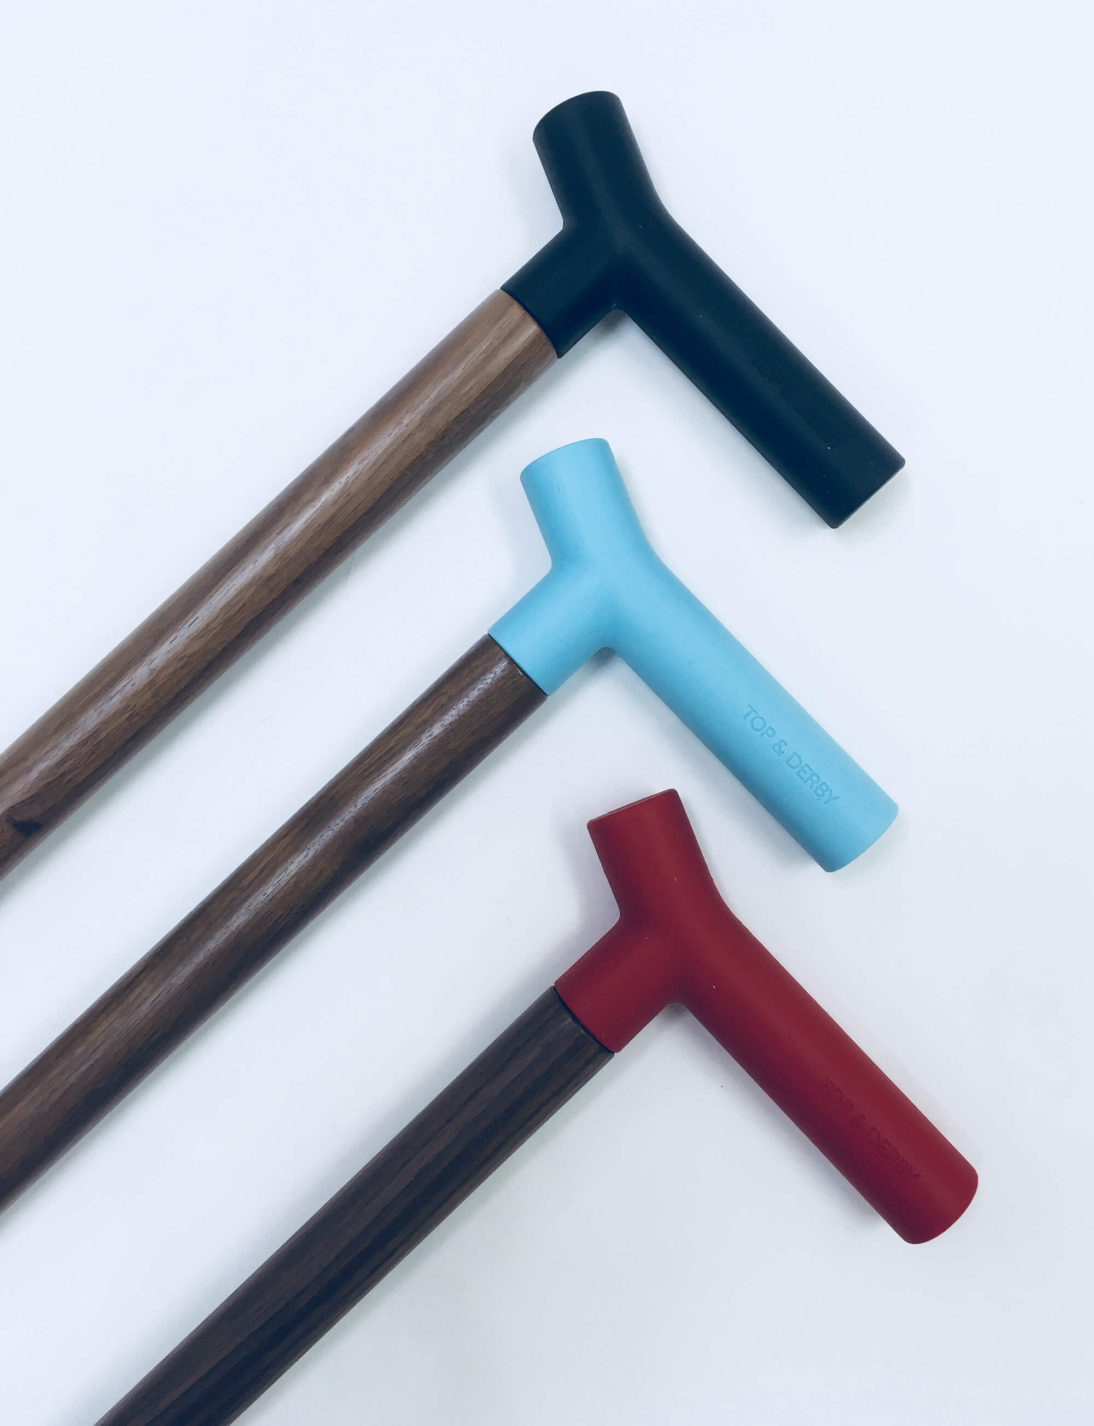 Three wooden walking canes in different sizes with silicone handles in black, red, and light blue.